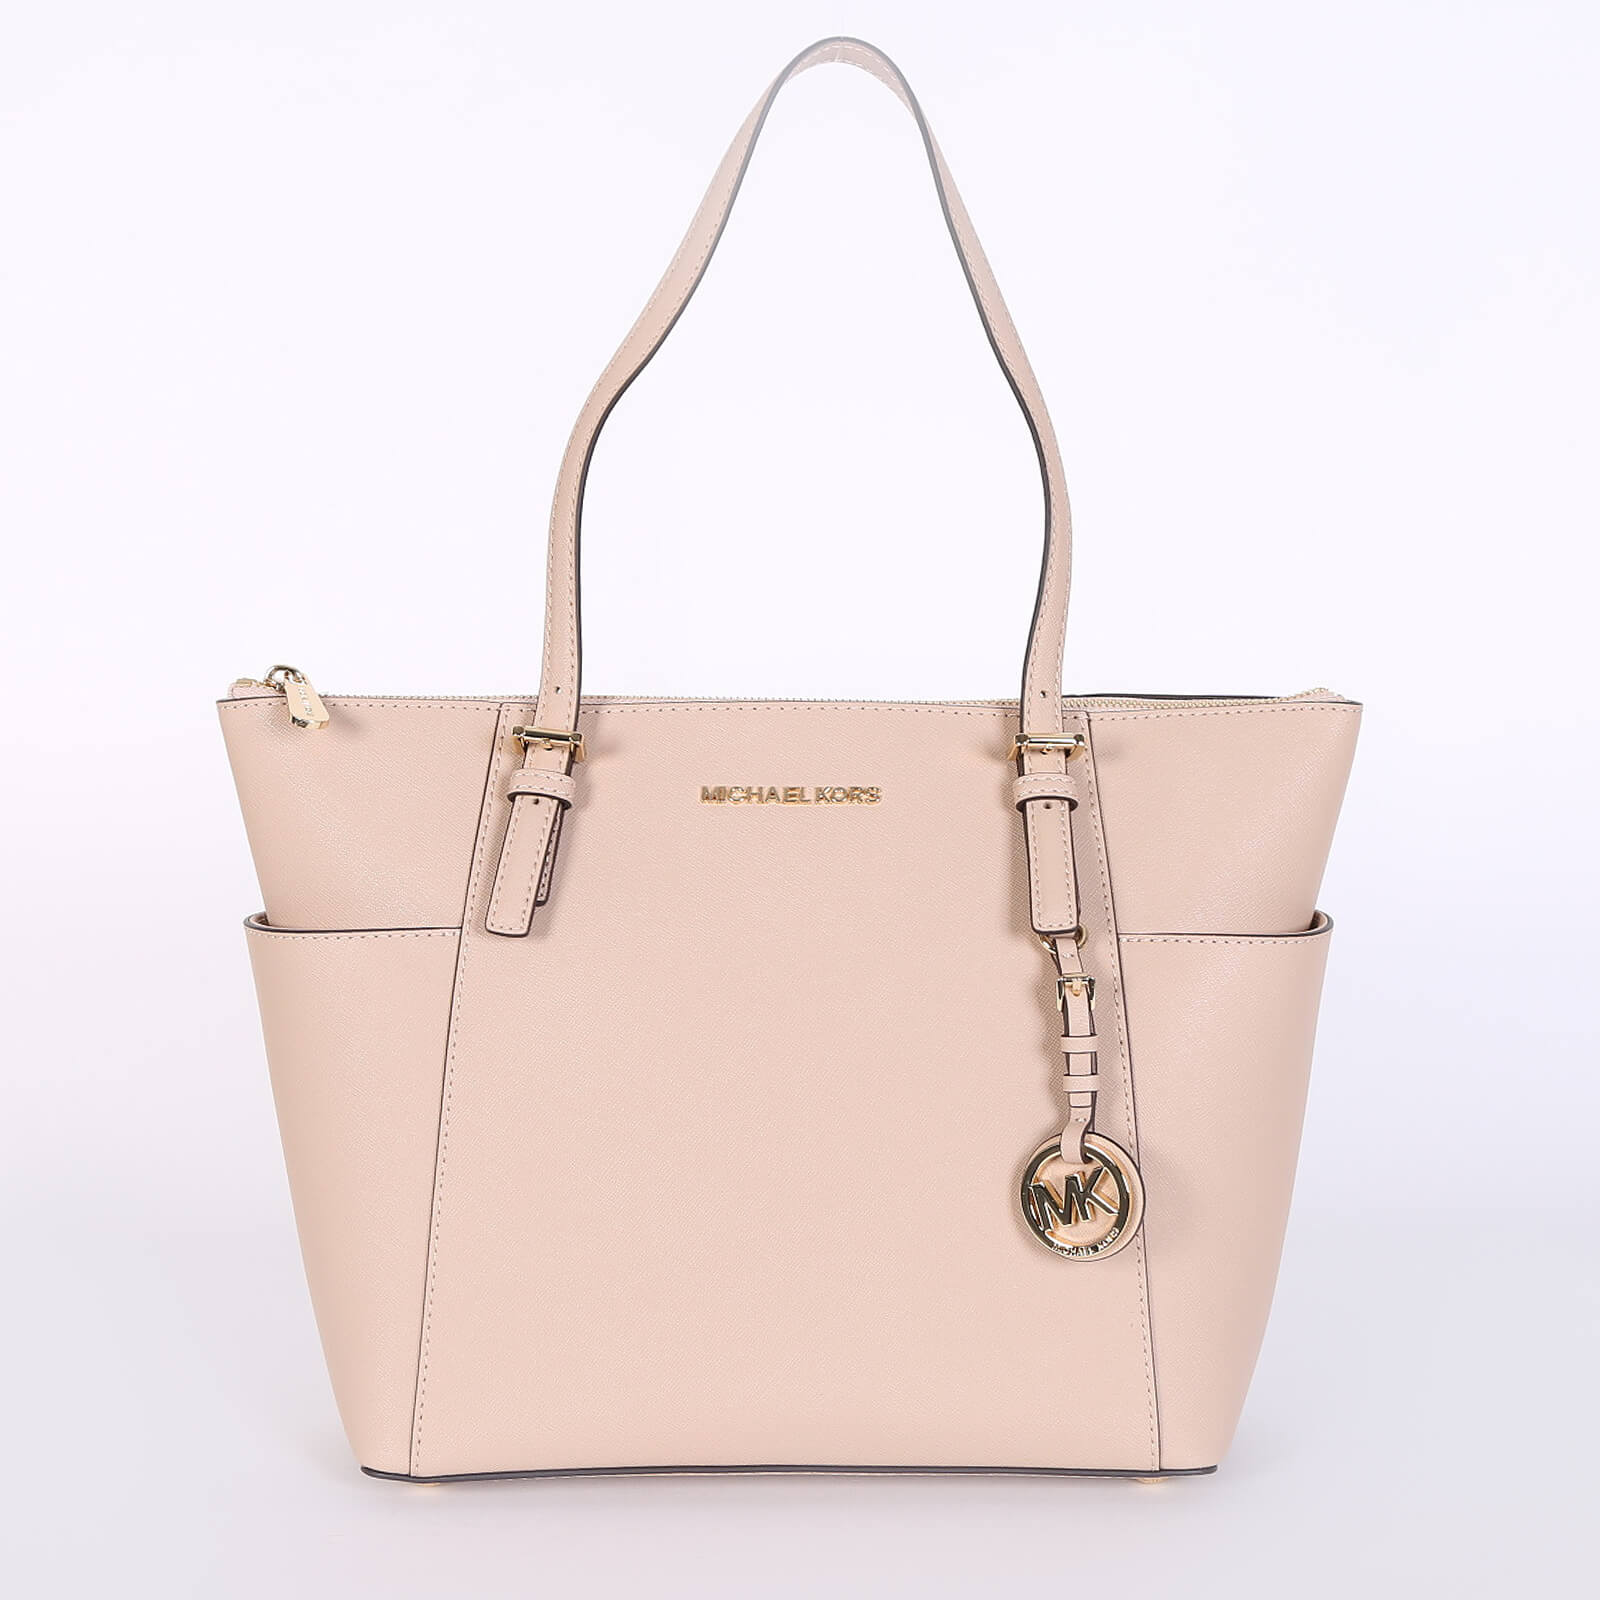 Michael Kors - Charlotte Large Saffiano Leather Top-Zip Tote Beige